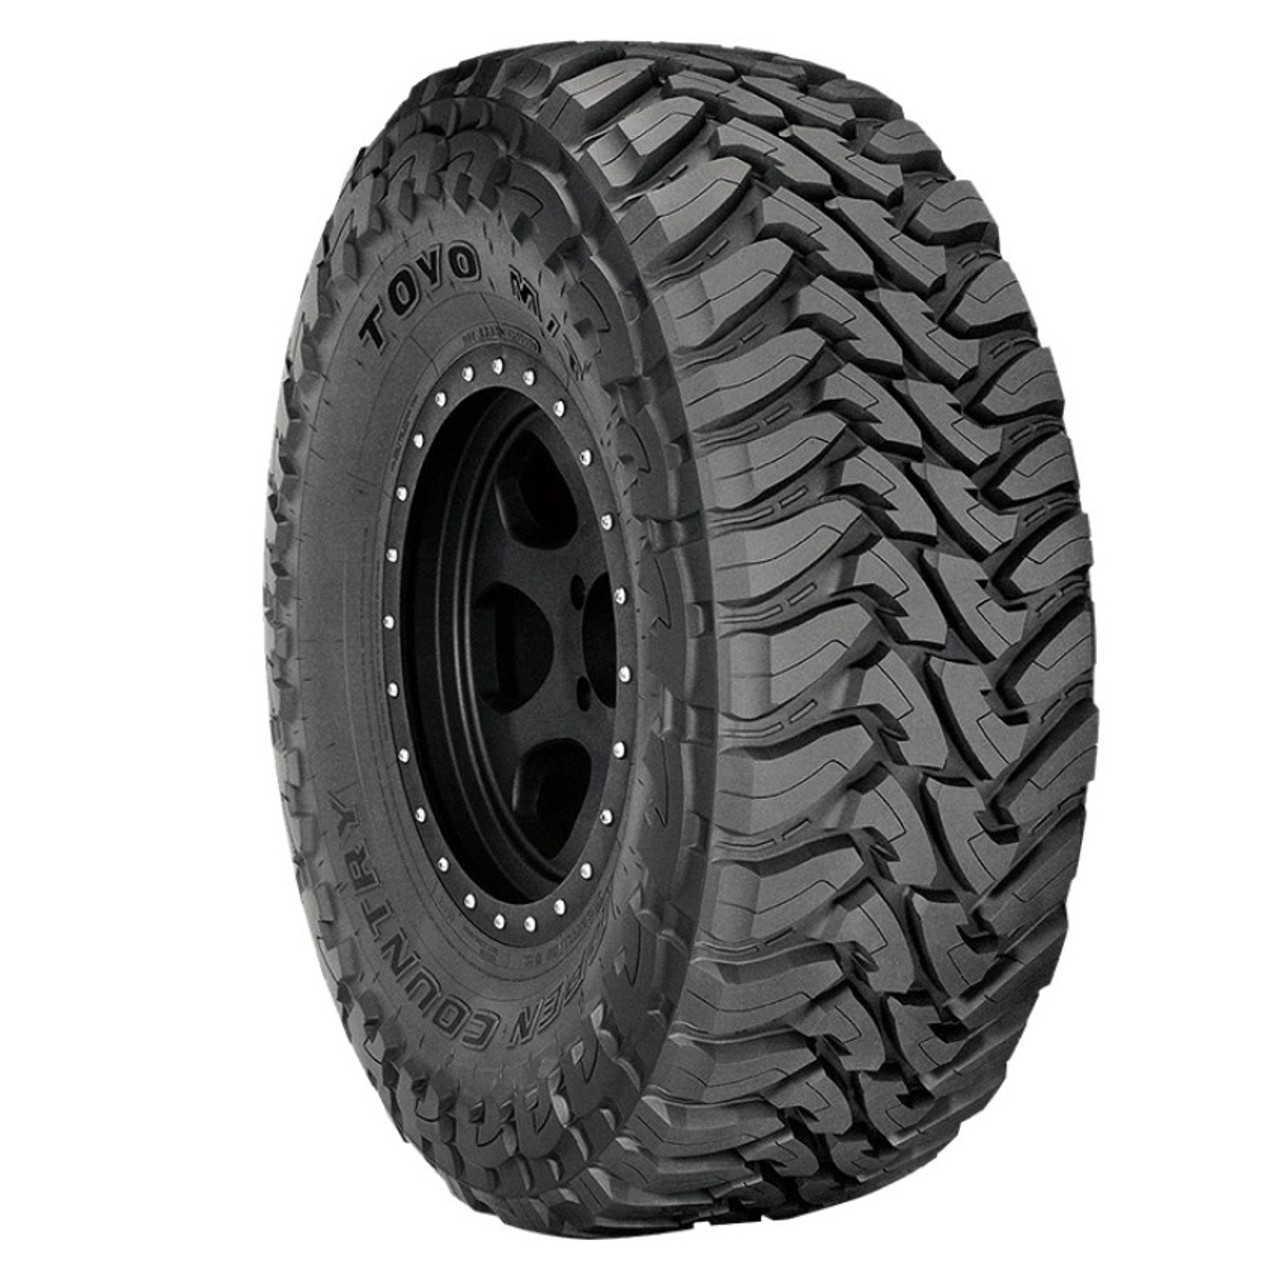 Toyo Open Country M/T Tire - 35X1350R15 114Q C/6